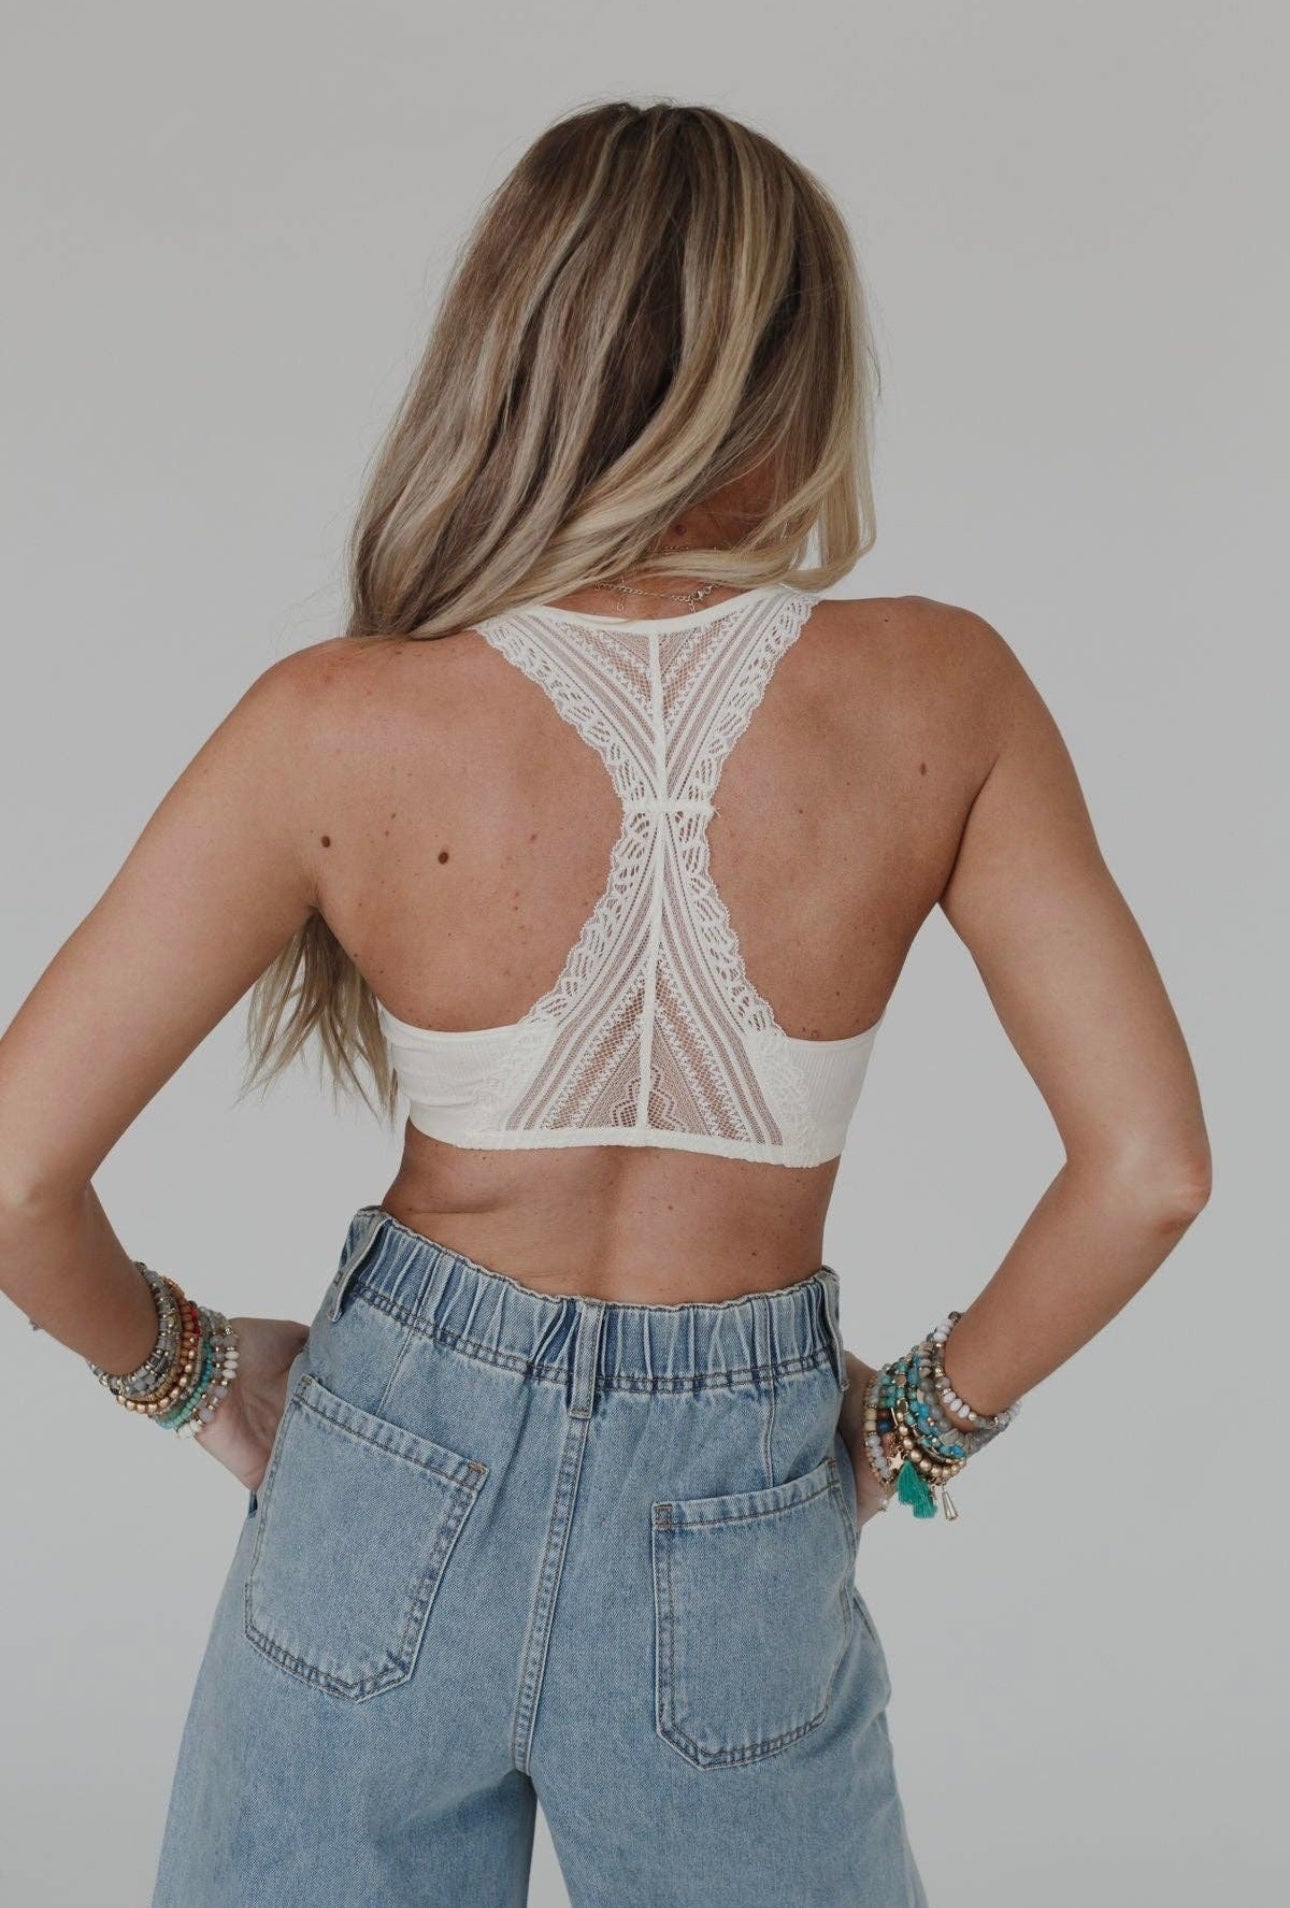 Evermore Seamless Lace Racerback Bralette - Ivory